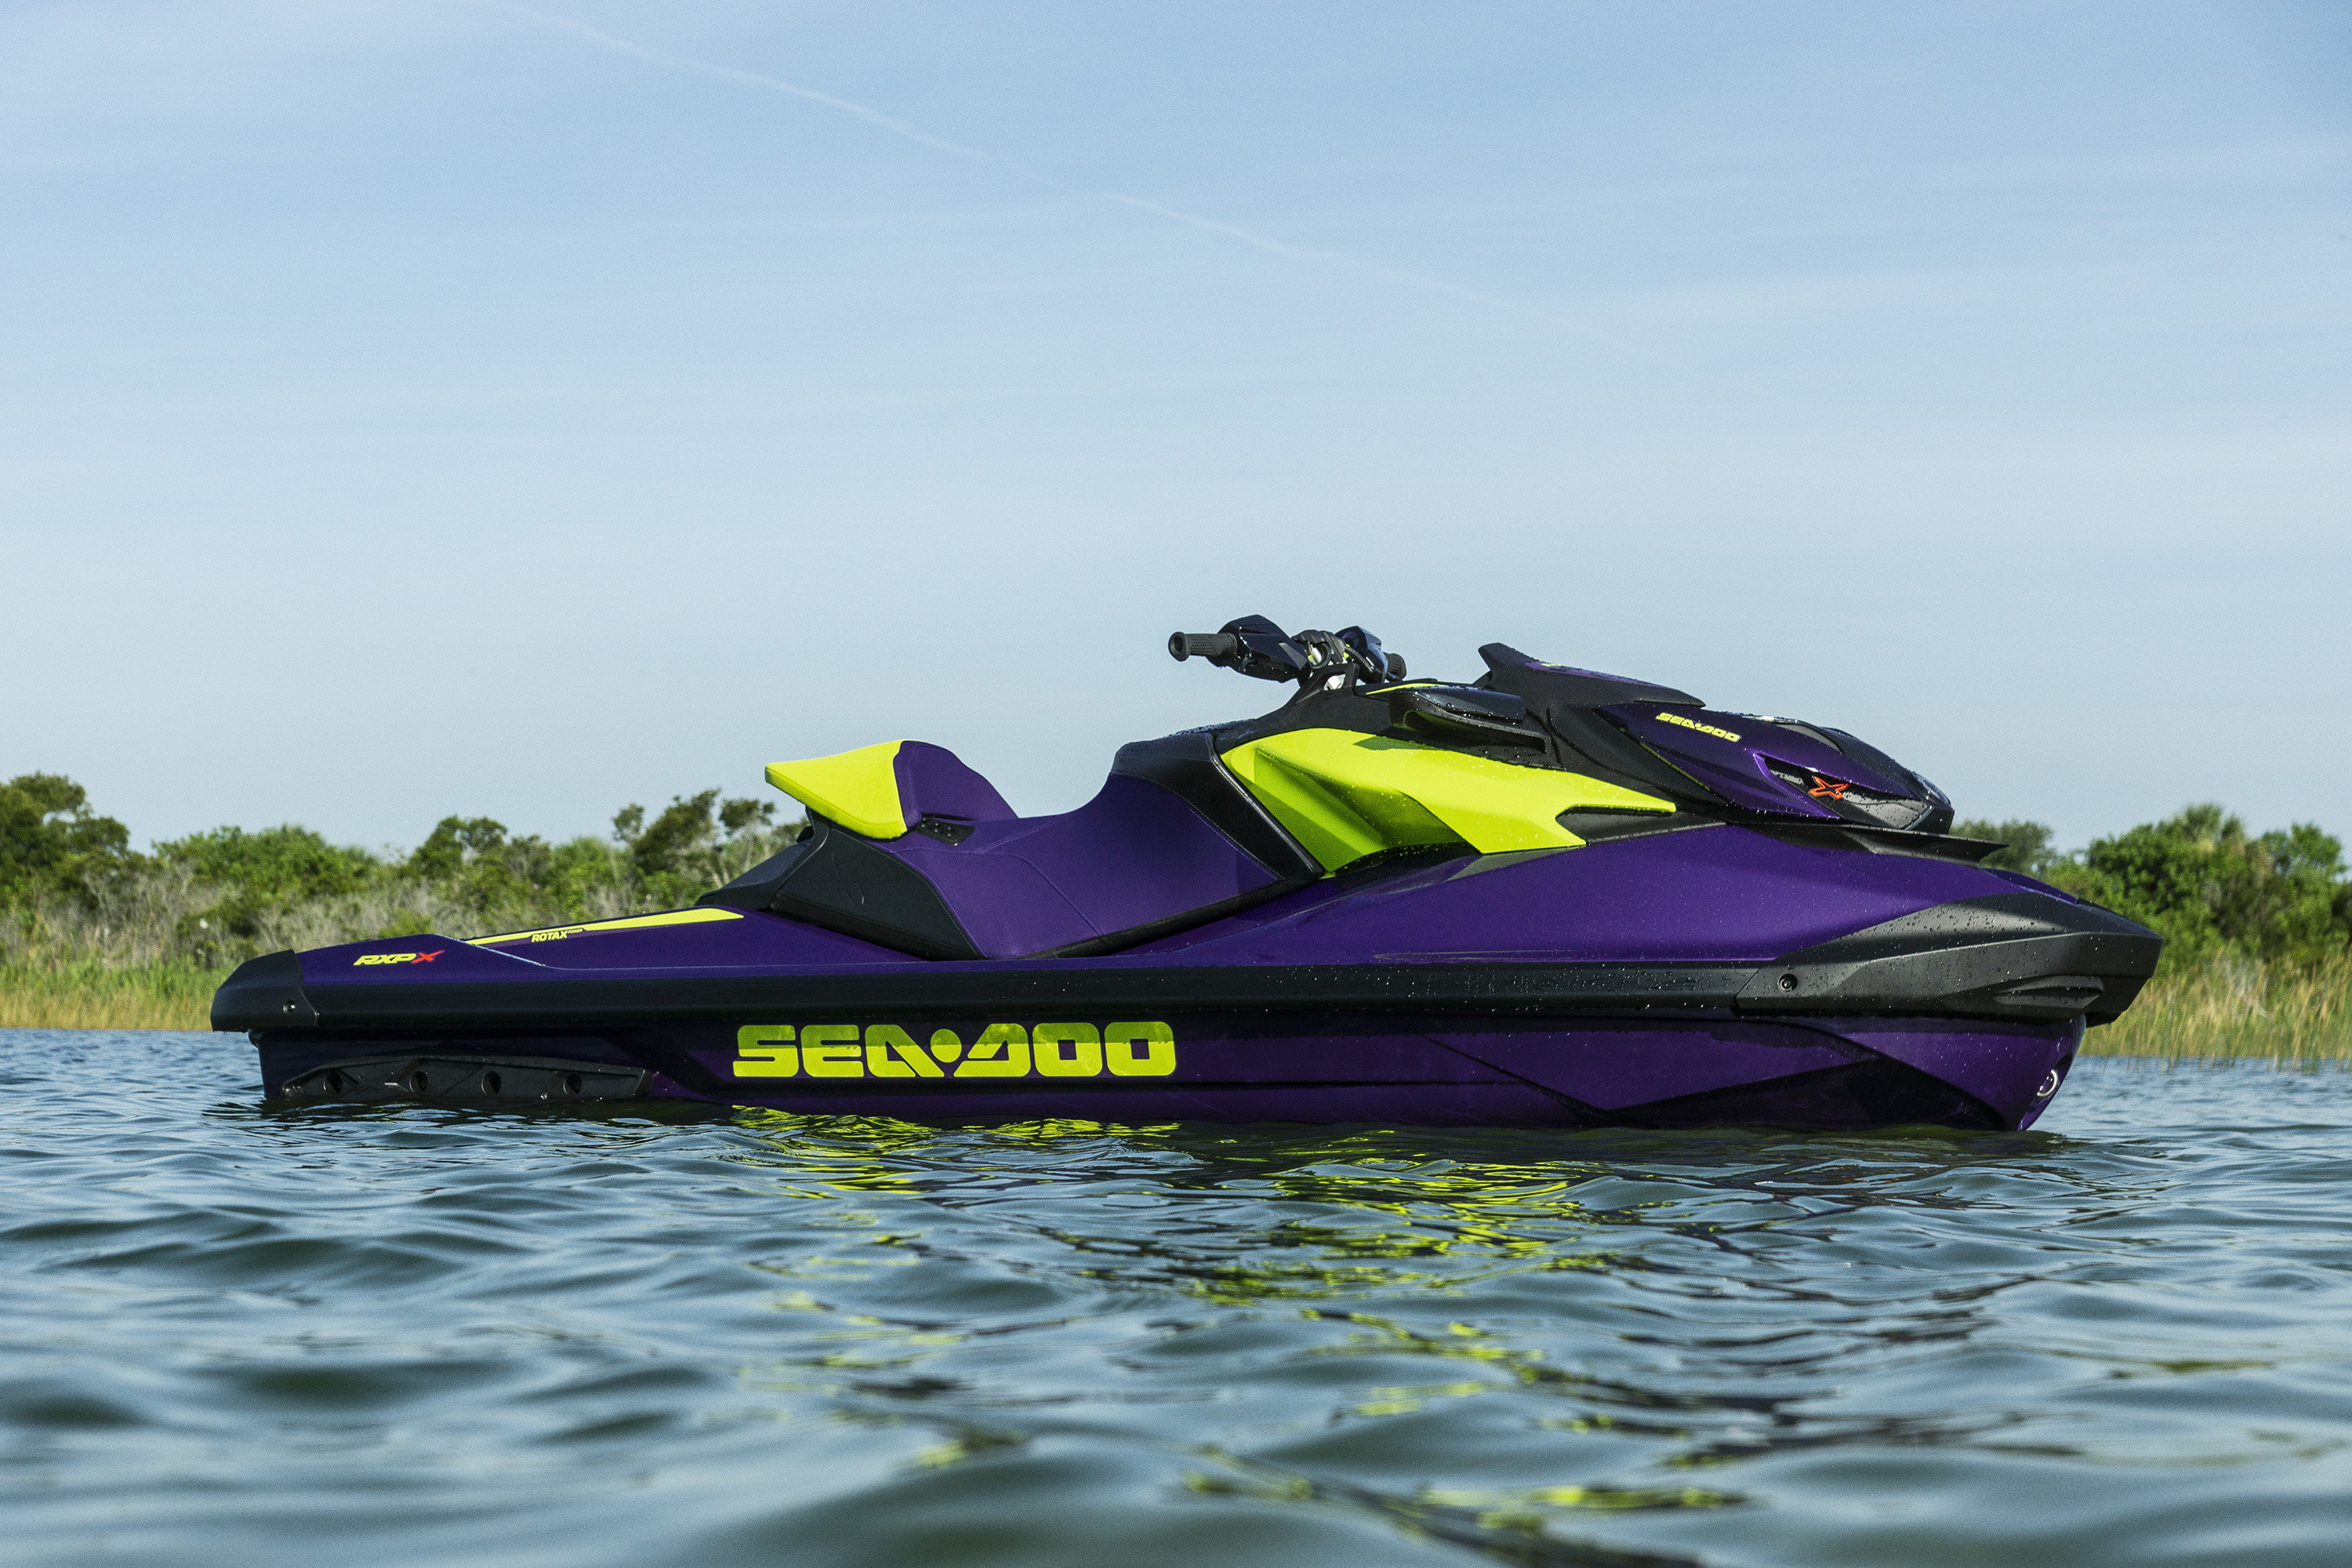 THE SEADOO RXPX RS 300 HAS WON THE 2021 WATERCRAFT OF THE YEAR